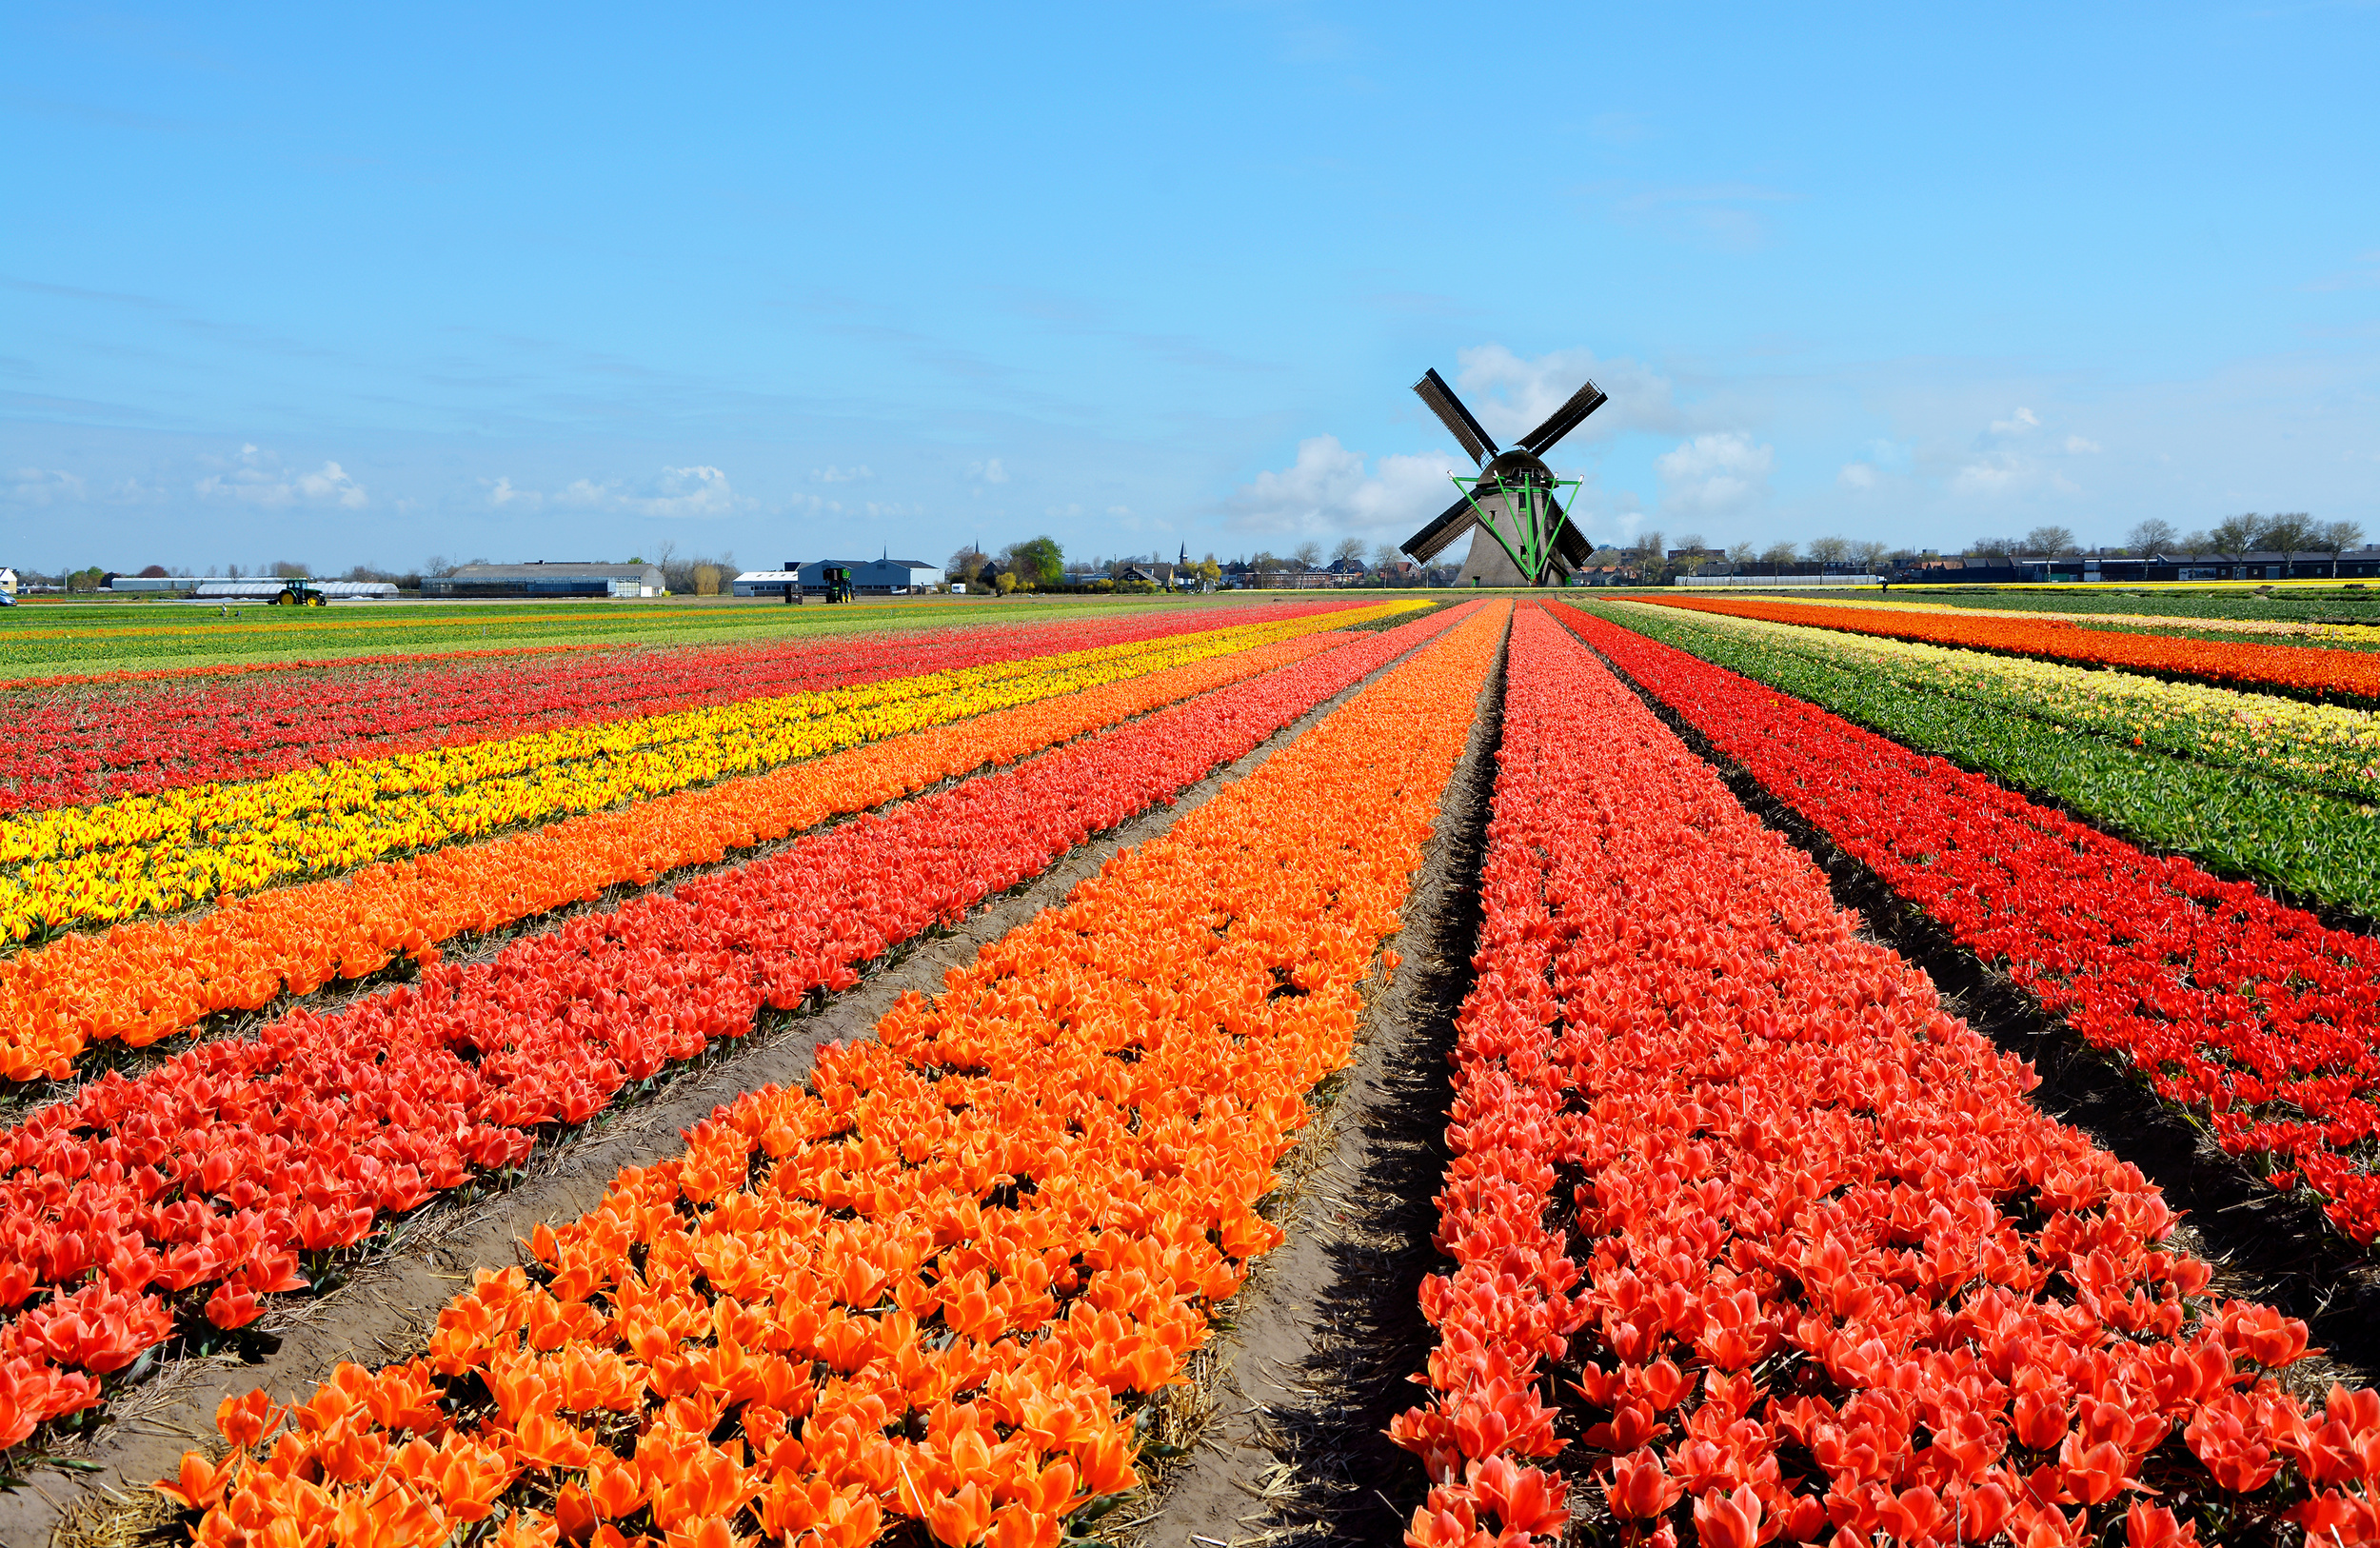 <p>Tulips in the Netherlands are the most famous floral event in Europe, so if you’re planning a trip, do so in advance. And don’t miss Lisse, home to some of the best tulip gardens in the entire country.</p><p><a href='https://www.msn.com/en-us/community/channel/vid-cj9pqbr0vn9in2b6ddcd8sfgpfq6x6utp44fssrv6mc2gtybw0us'>Follow us on MSN to see more of our exclusive lifestyle content.</a></p>